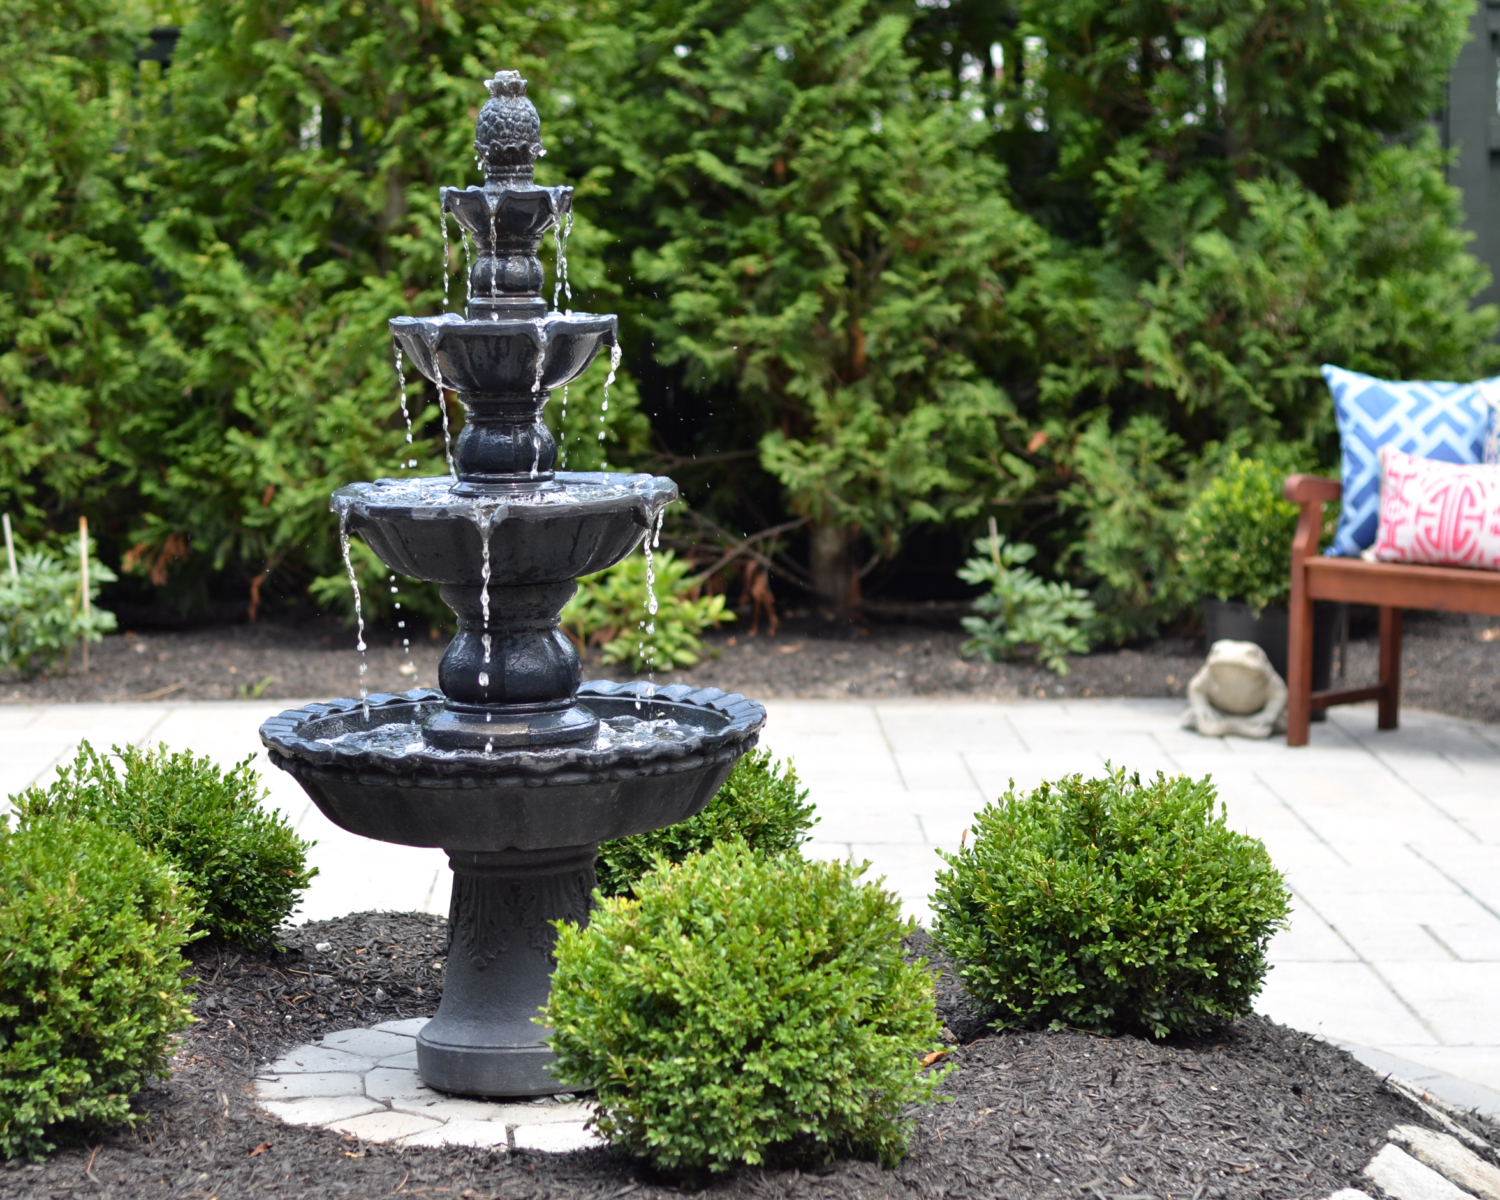 Custom paver patio with a fountain at the center, classic outdoor living space ideas for decorating your deck or patio